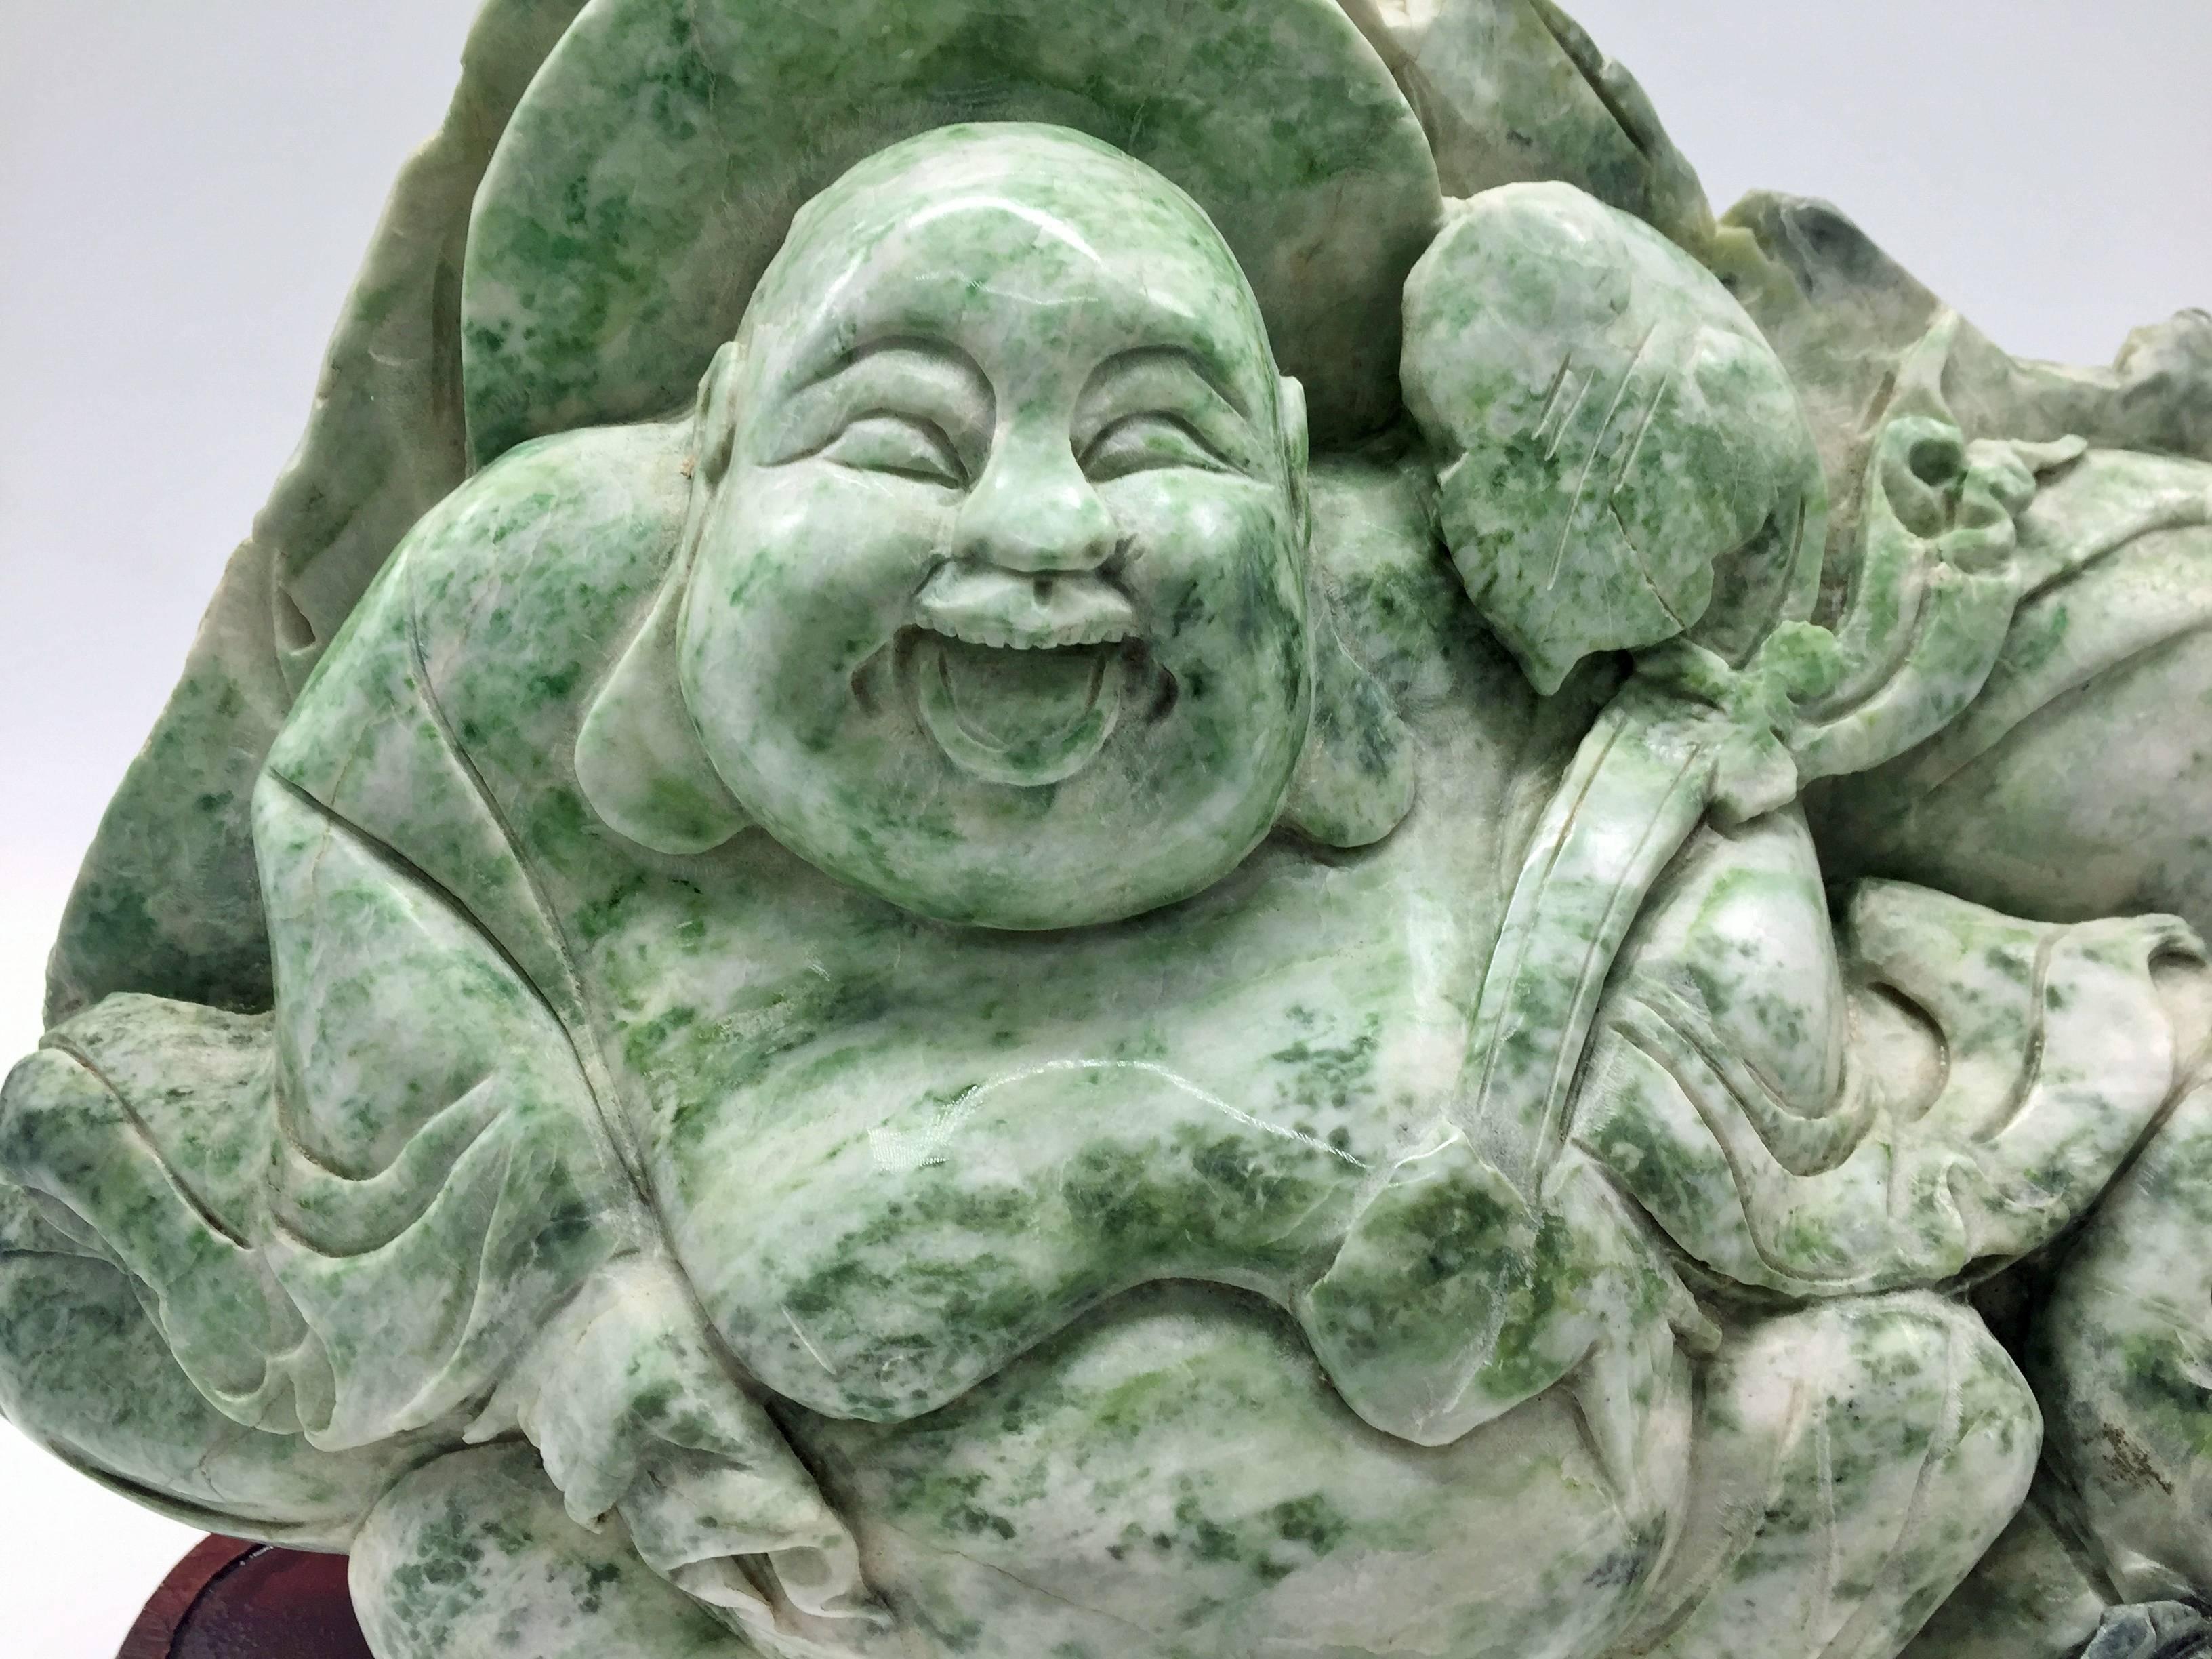 This is a very rare piece that weights an incredible near 13lbs.

The Happy Buddha is one of the most beloved Buddhas in the Asian culture. He is believed to bring good health, happiness and harmony. This wonderful sculpture expressed great joy